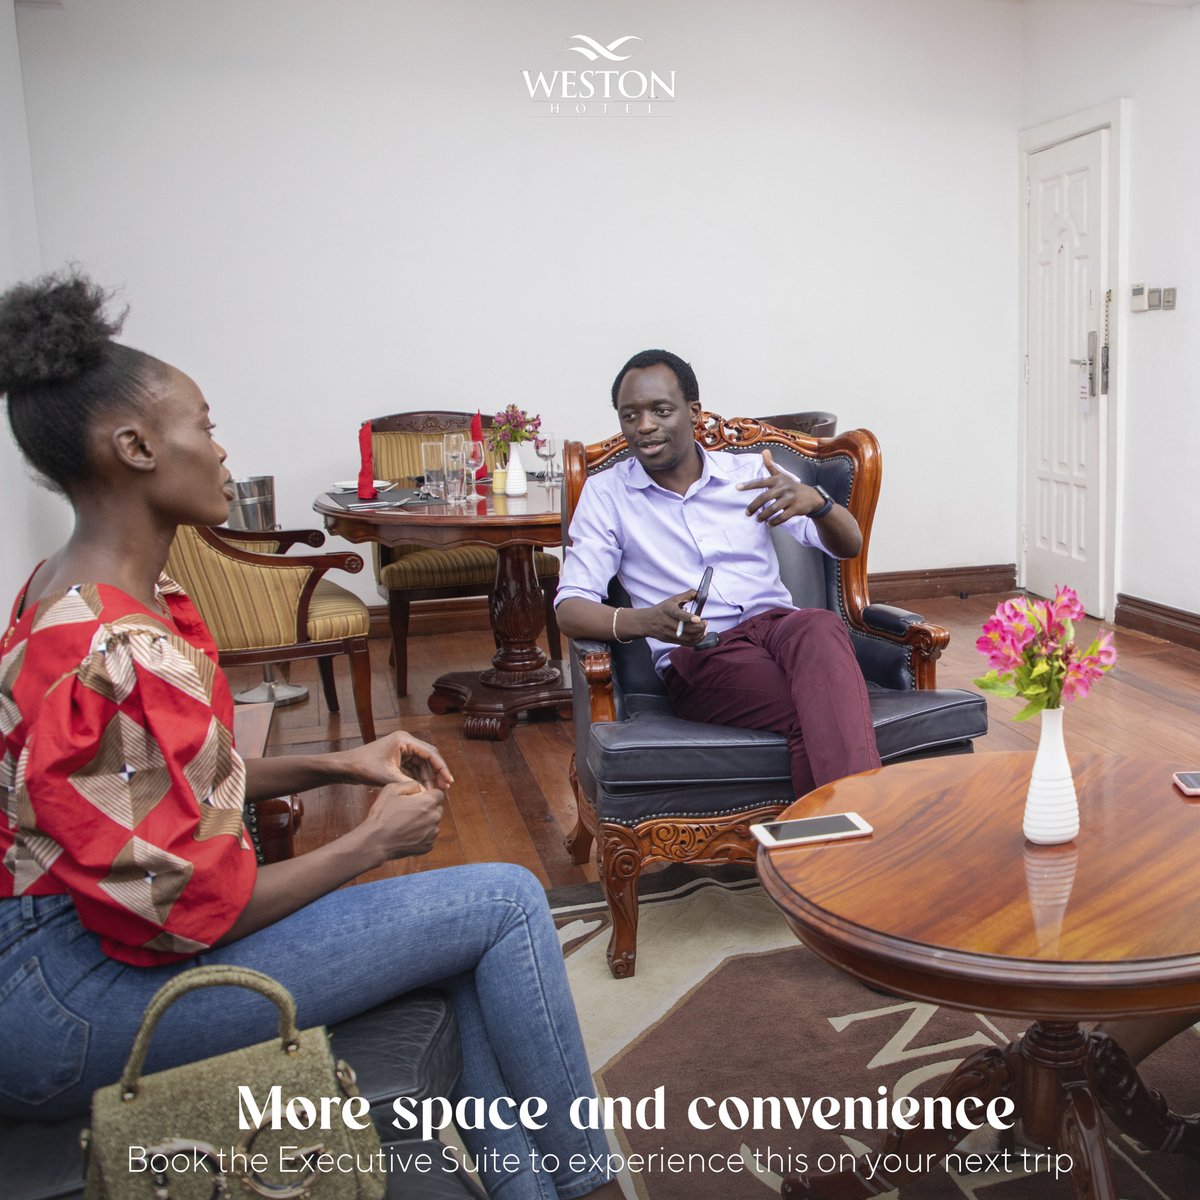 Our rooms are big and spacious enough to allow a little more conversation. We'll meet all your needs when you travel for business in Nairobi.
.
.
.
#BusinessSuccess  #businesslunch #luxurystay